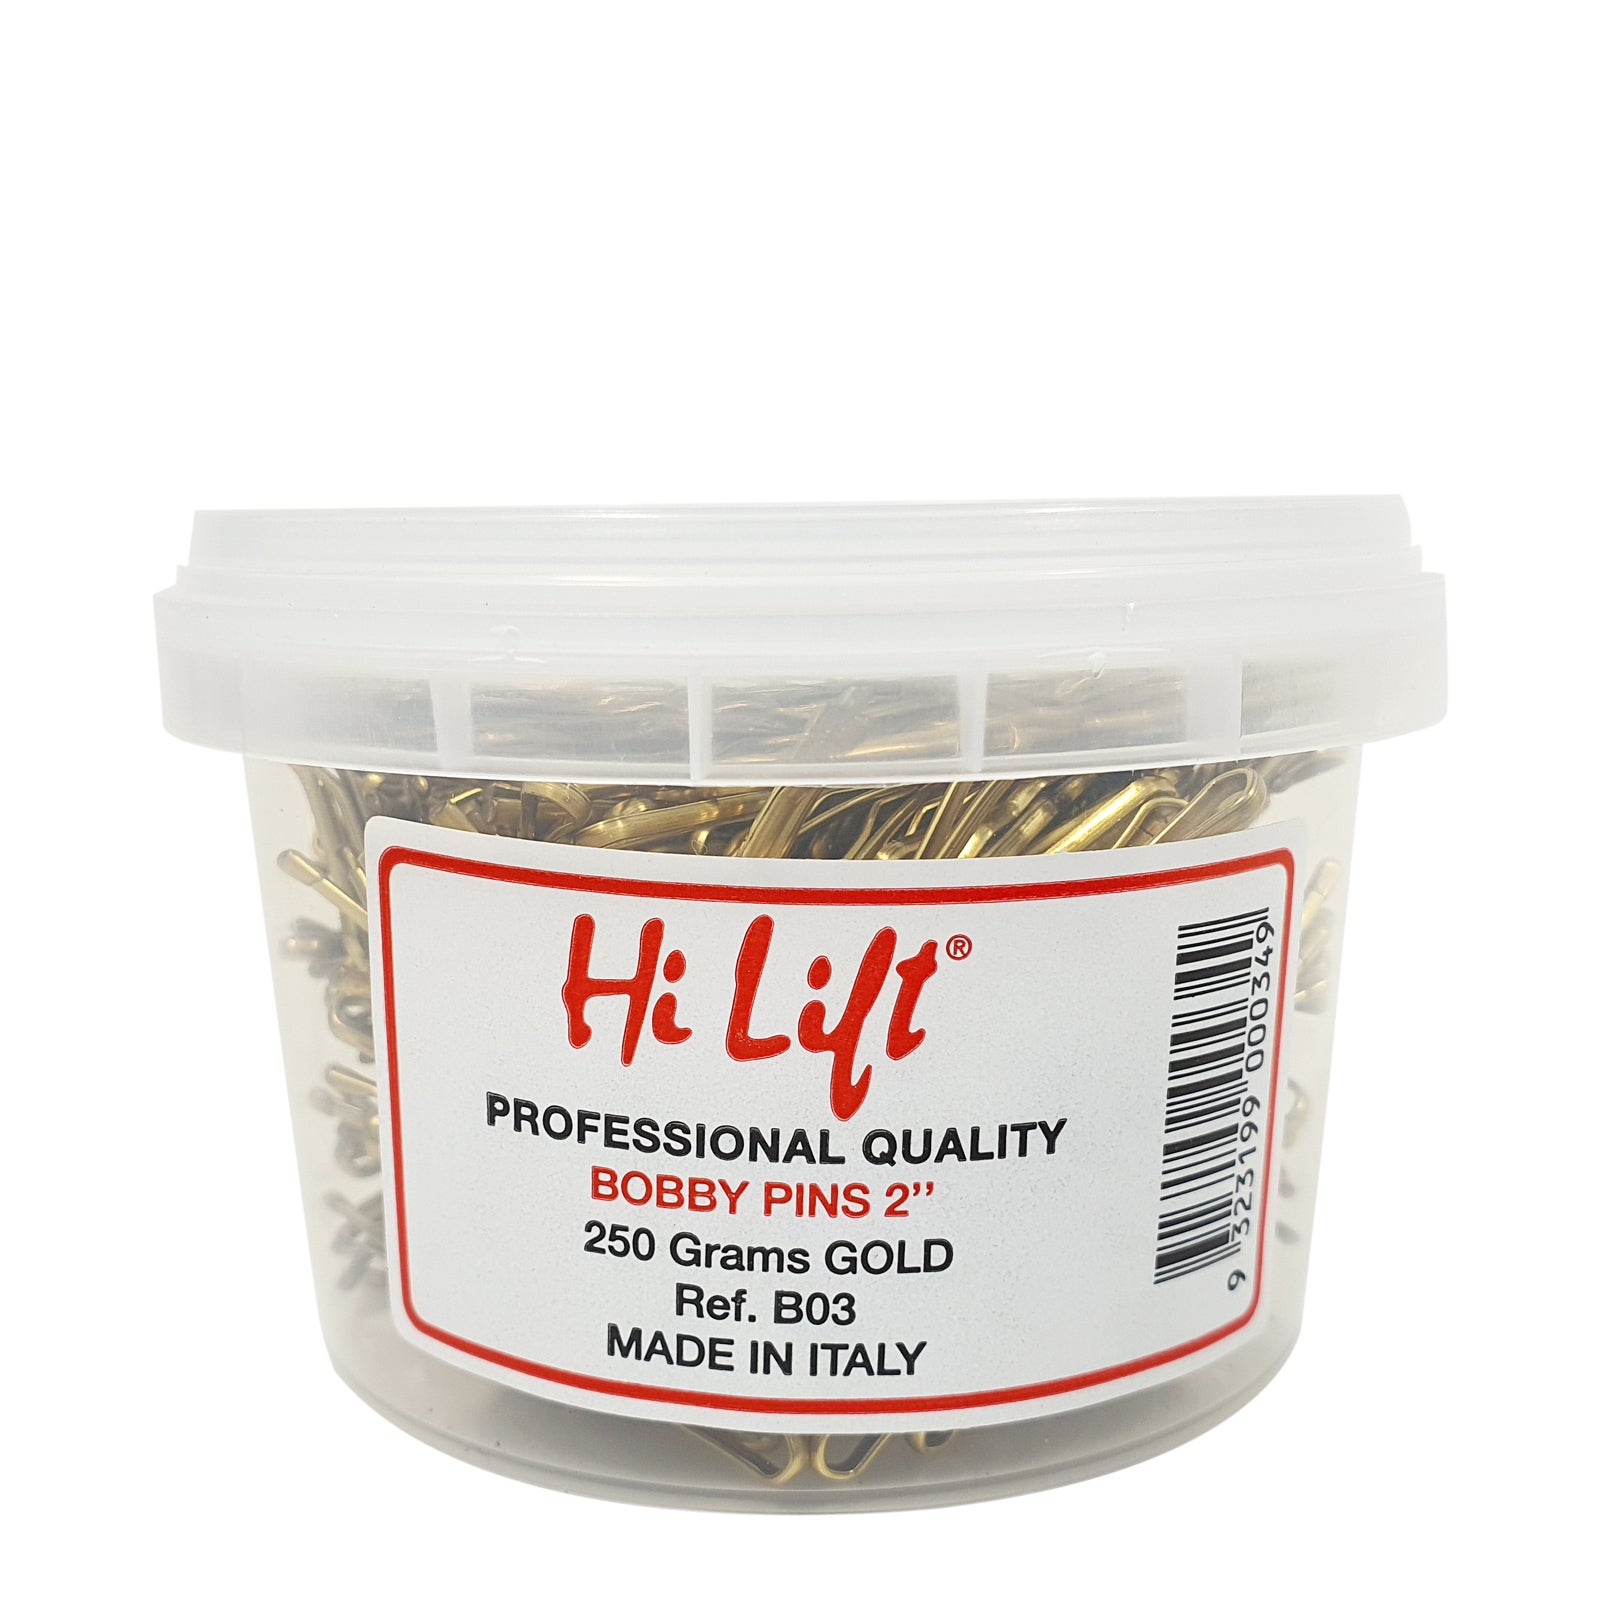 Hi Lift Professional Quality Hair Tie Styling Bobby Pins 2" Gold 250g